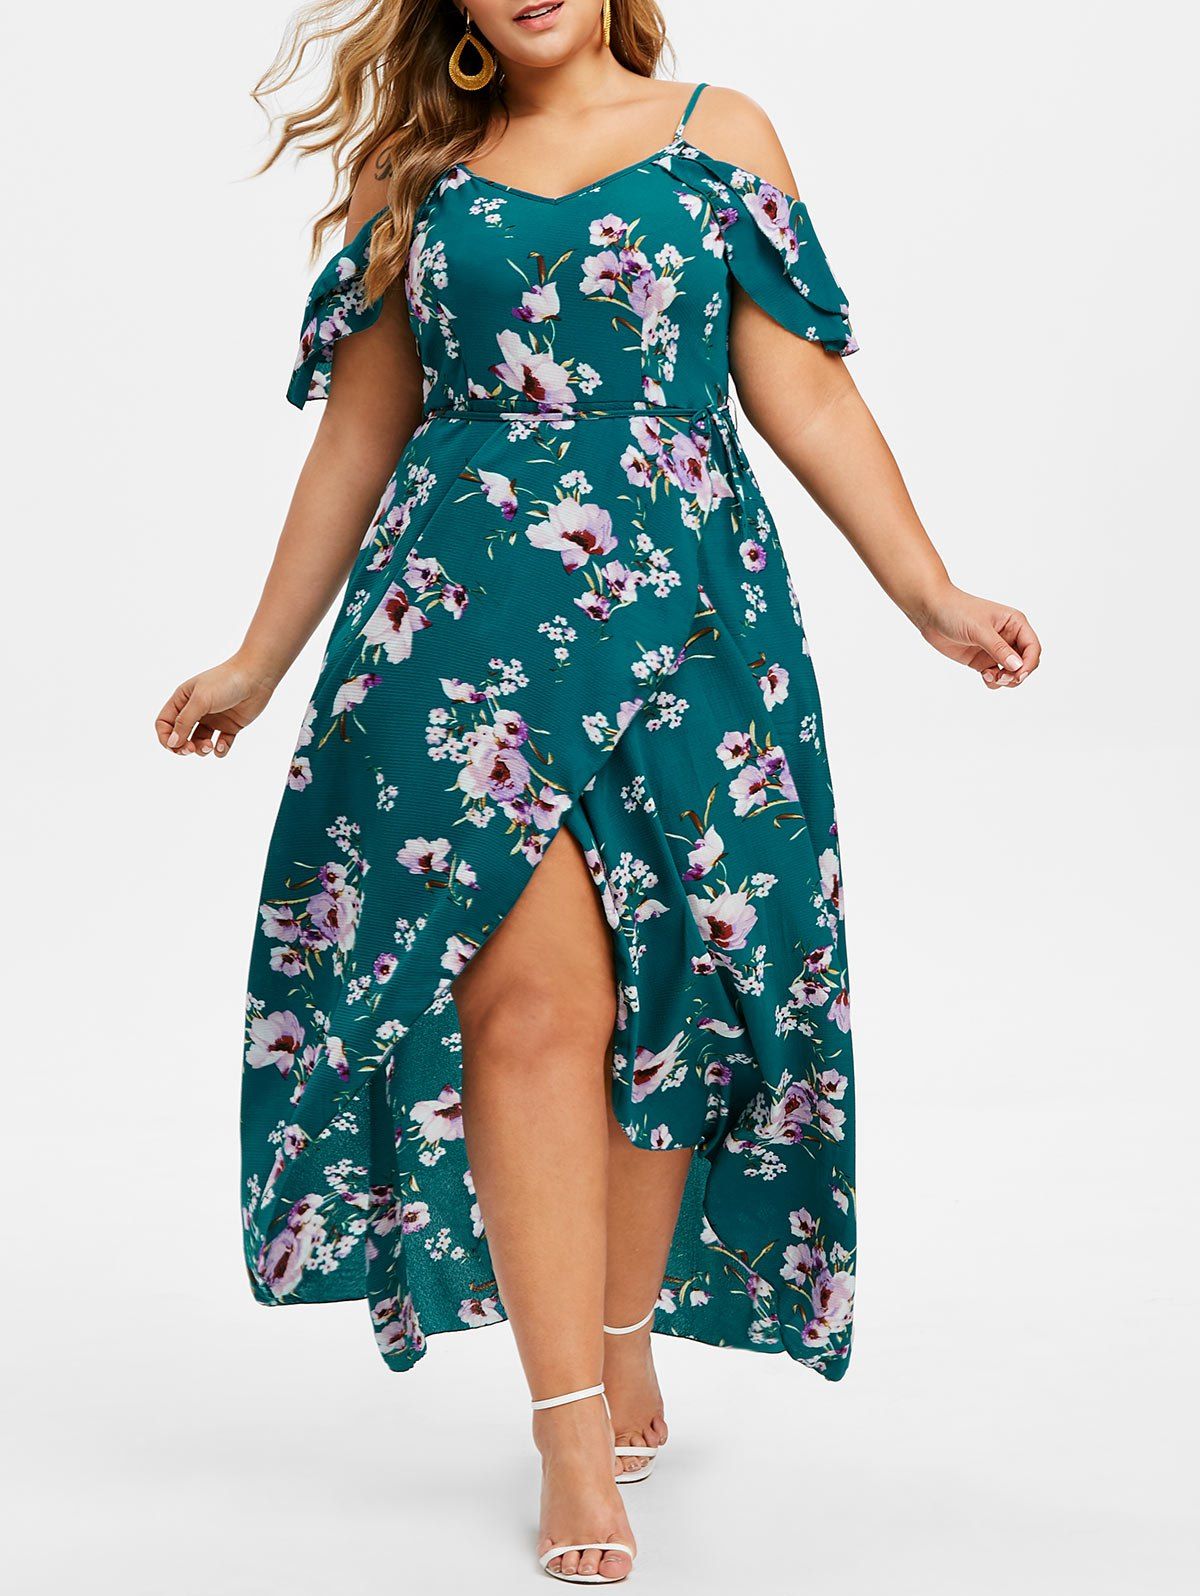 [36% OFF] 2020 Plus Size Cold Shoulder Floral Maxi Flowing Dress In SEA ...